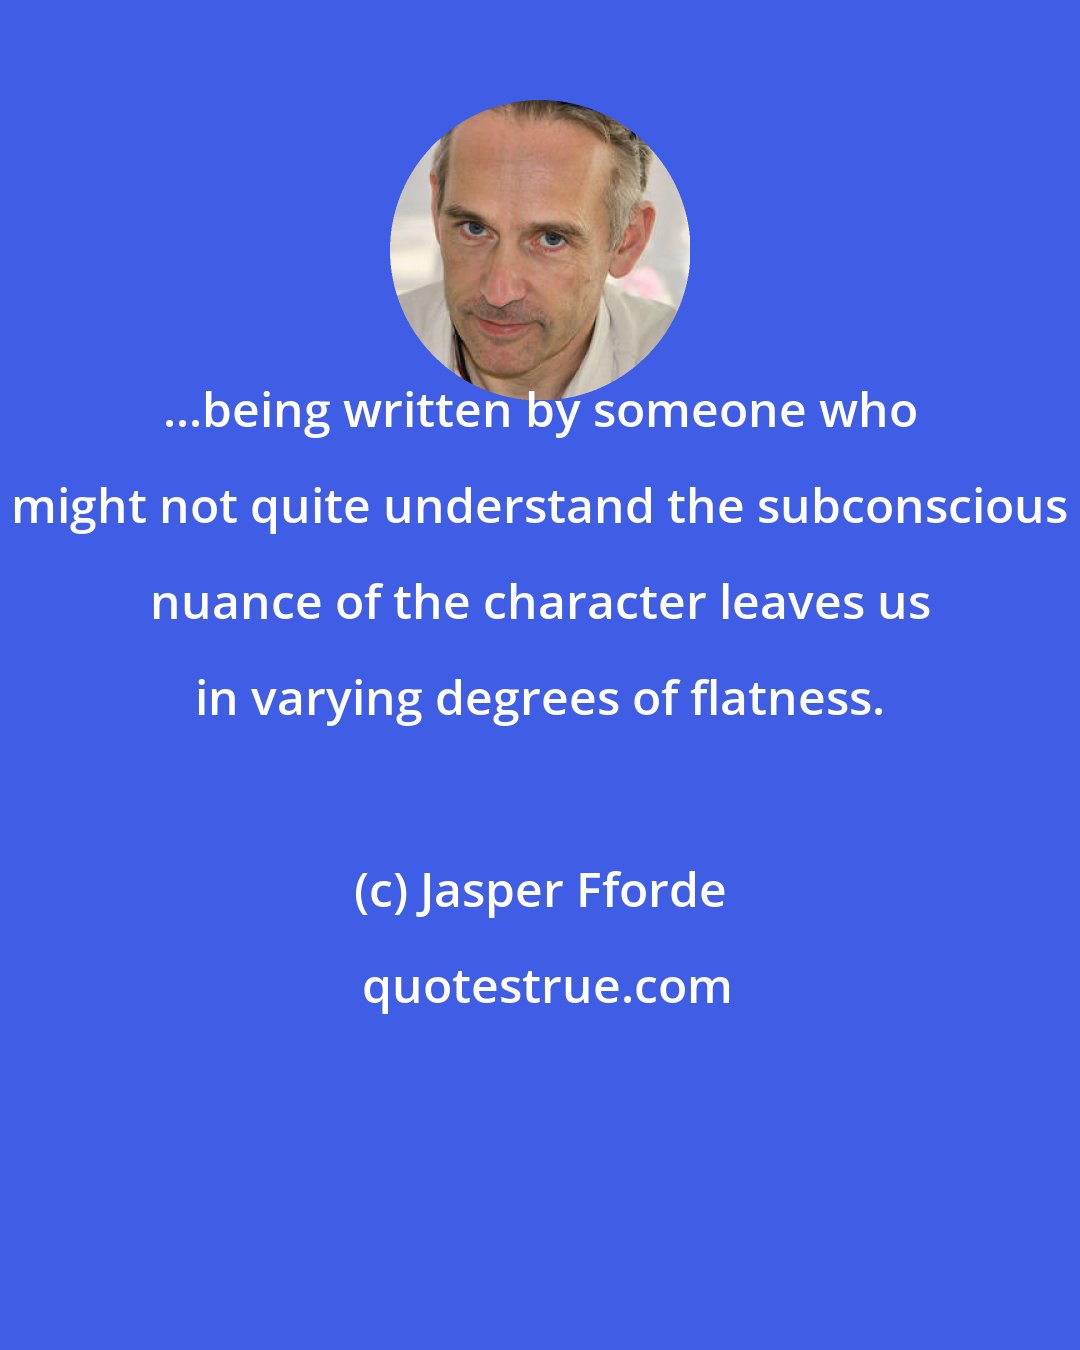 Jasper Fforde: ...being written by someone who might not quite understand the subconscious nuance of the character leaves us in varying degrees of flatness.